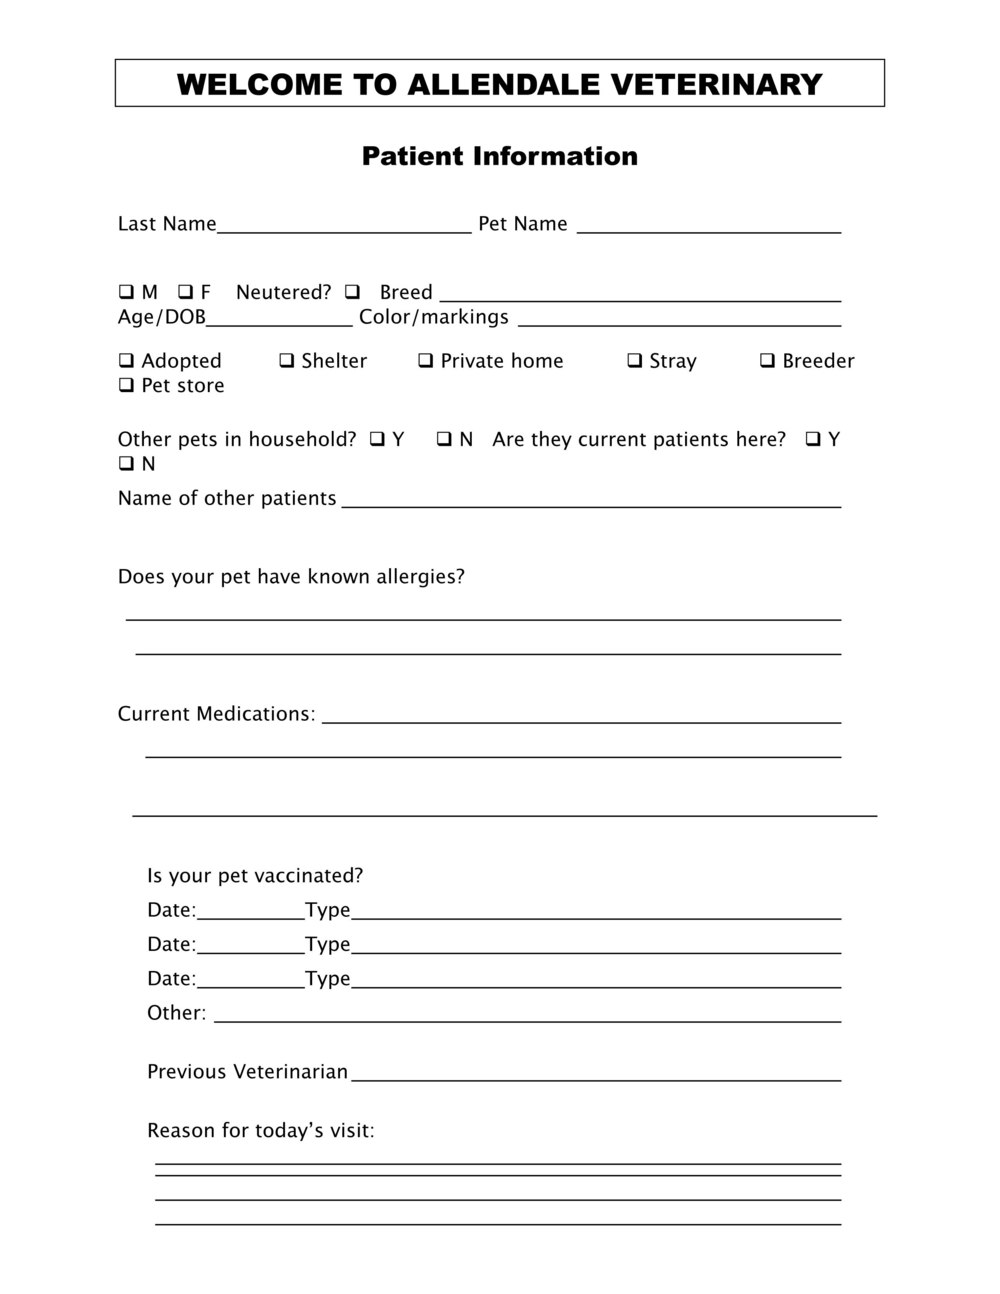 forms-allendale-veterinary-hospital